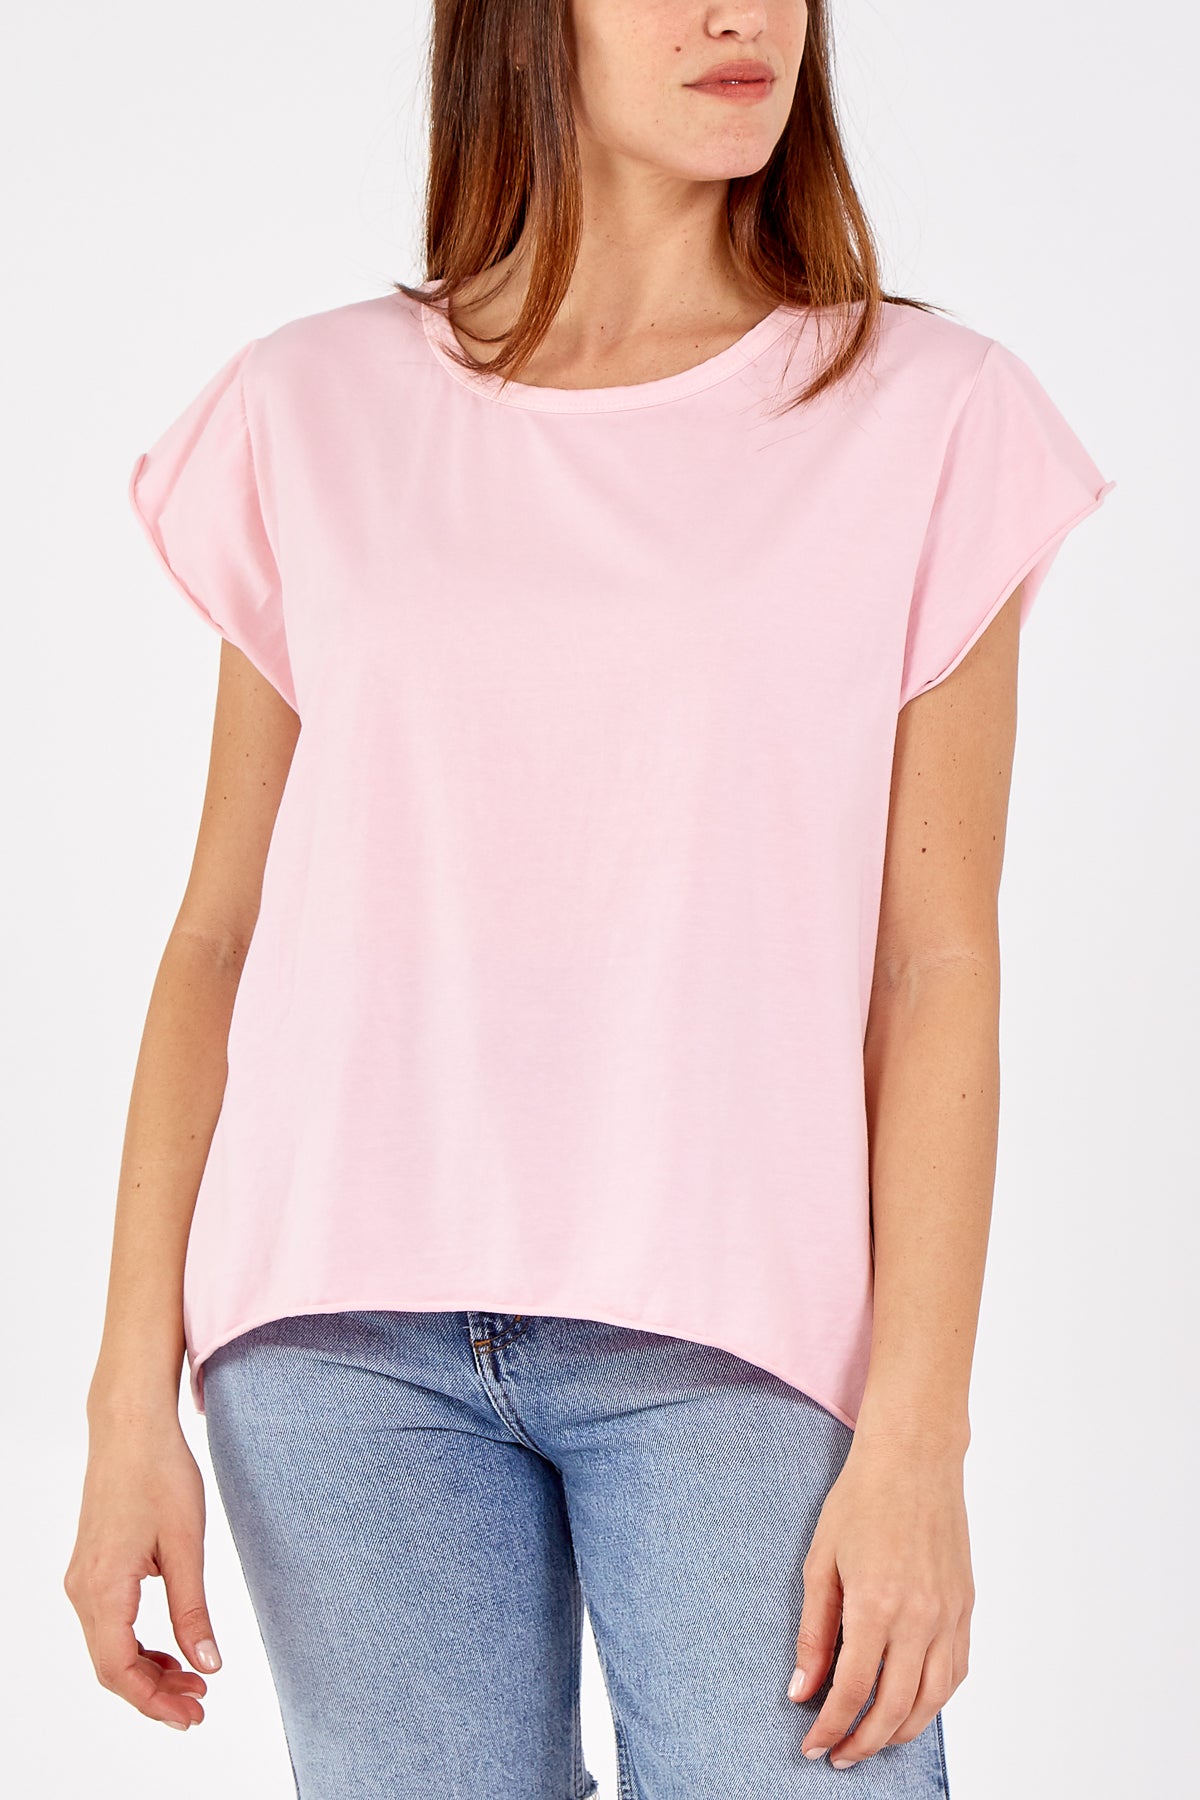 Cap Sleeve High Low Rolled Edge Top